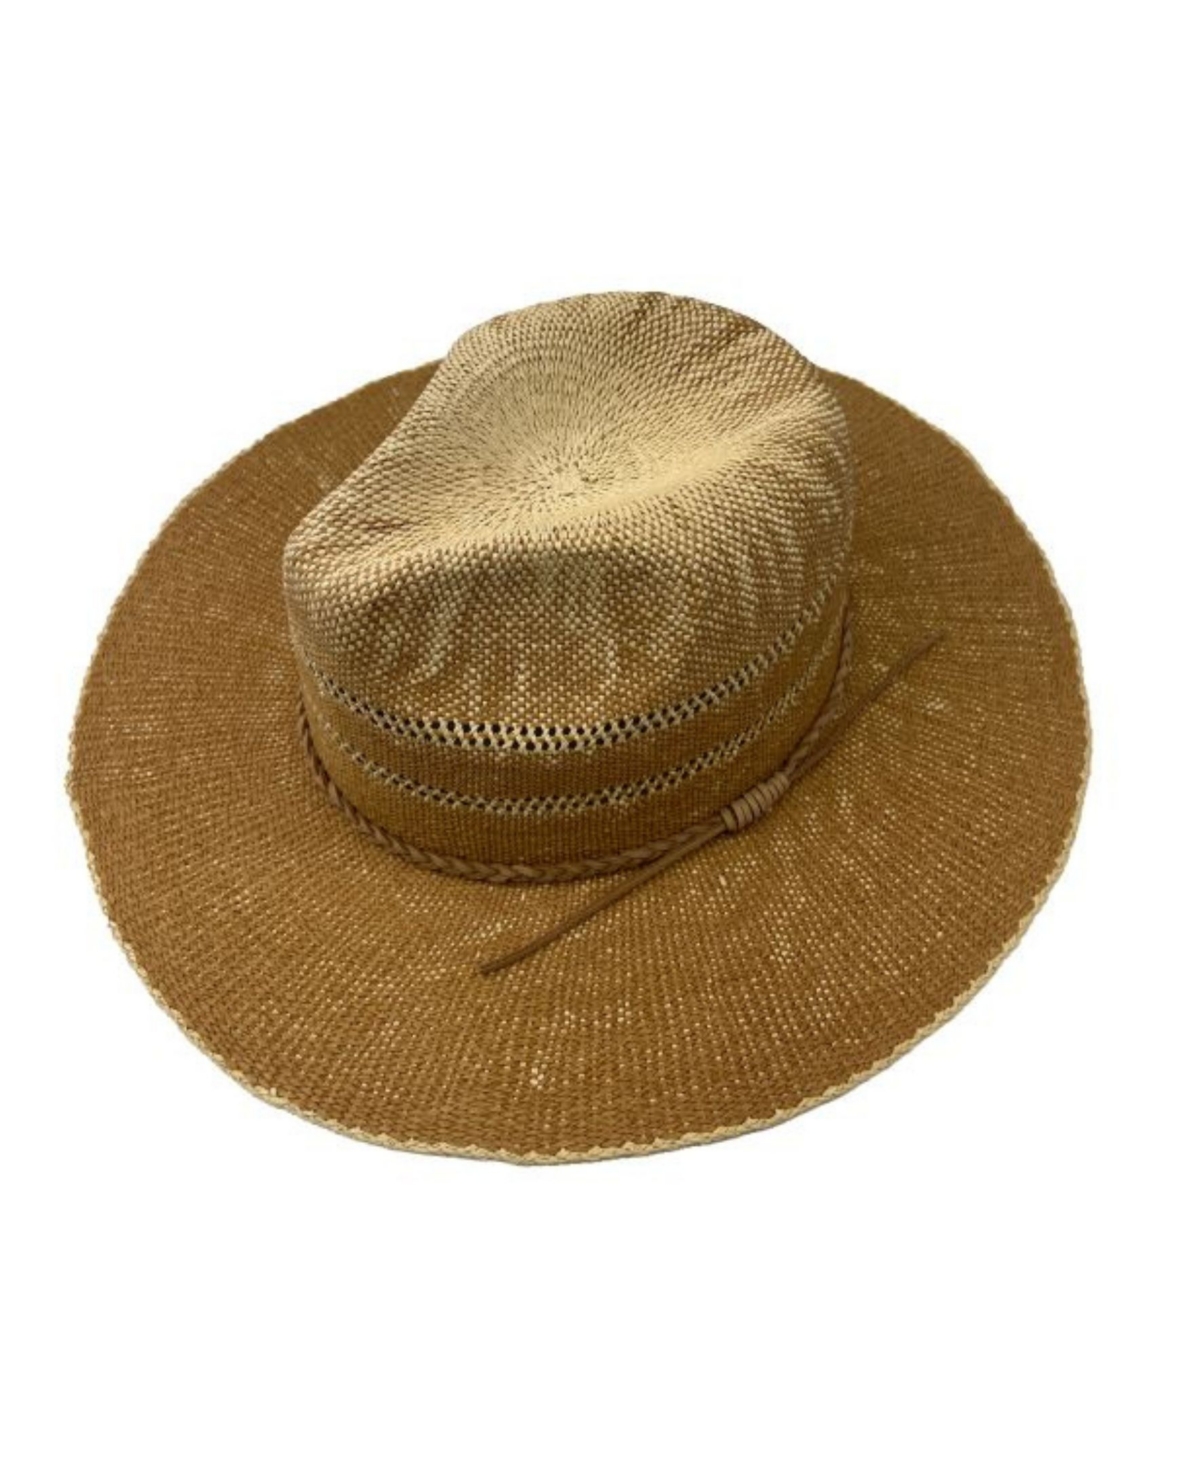 Marcus Adler Faux Suede Braided Trim With Straw Panama Hat In Dark Tan